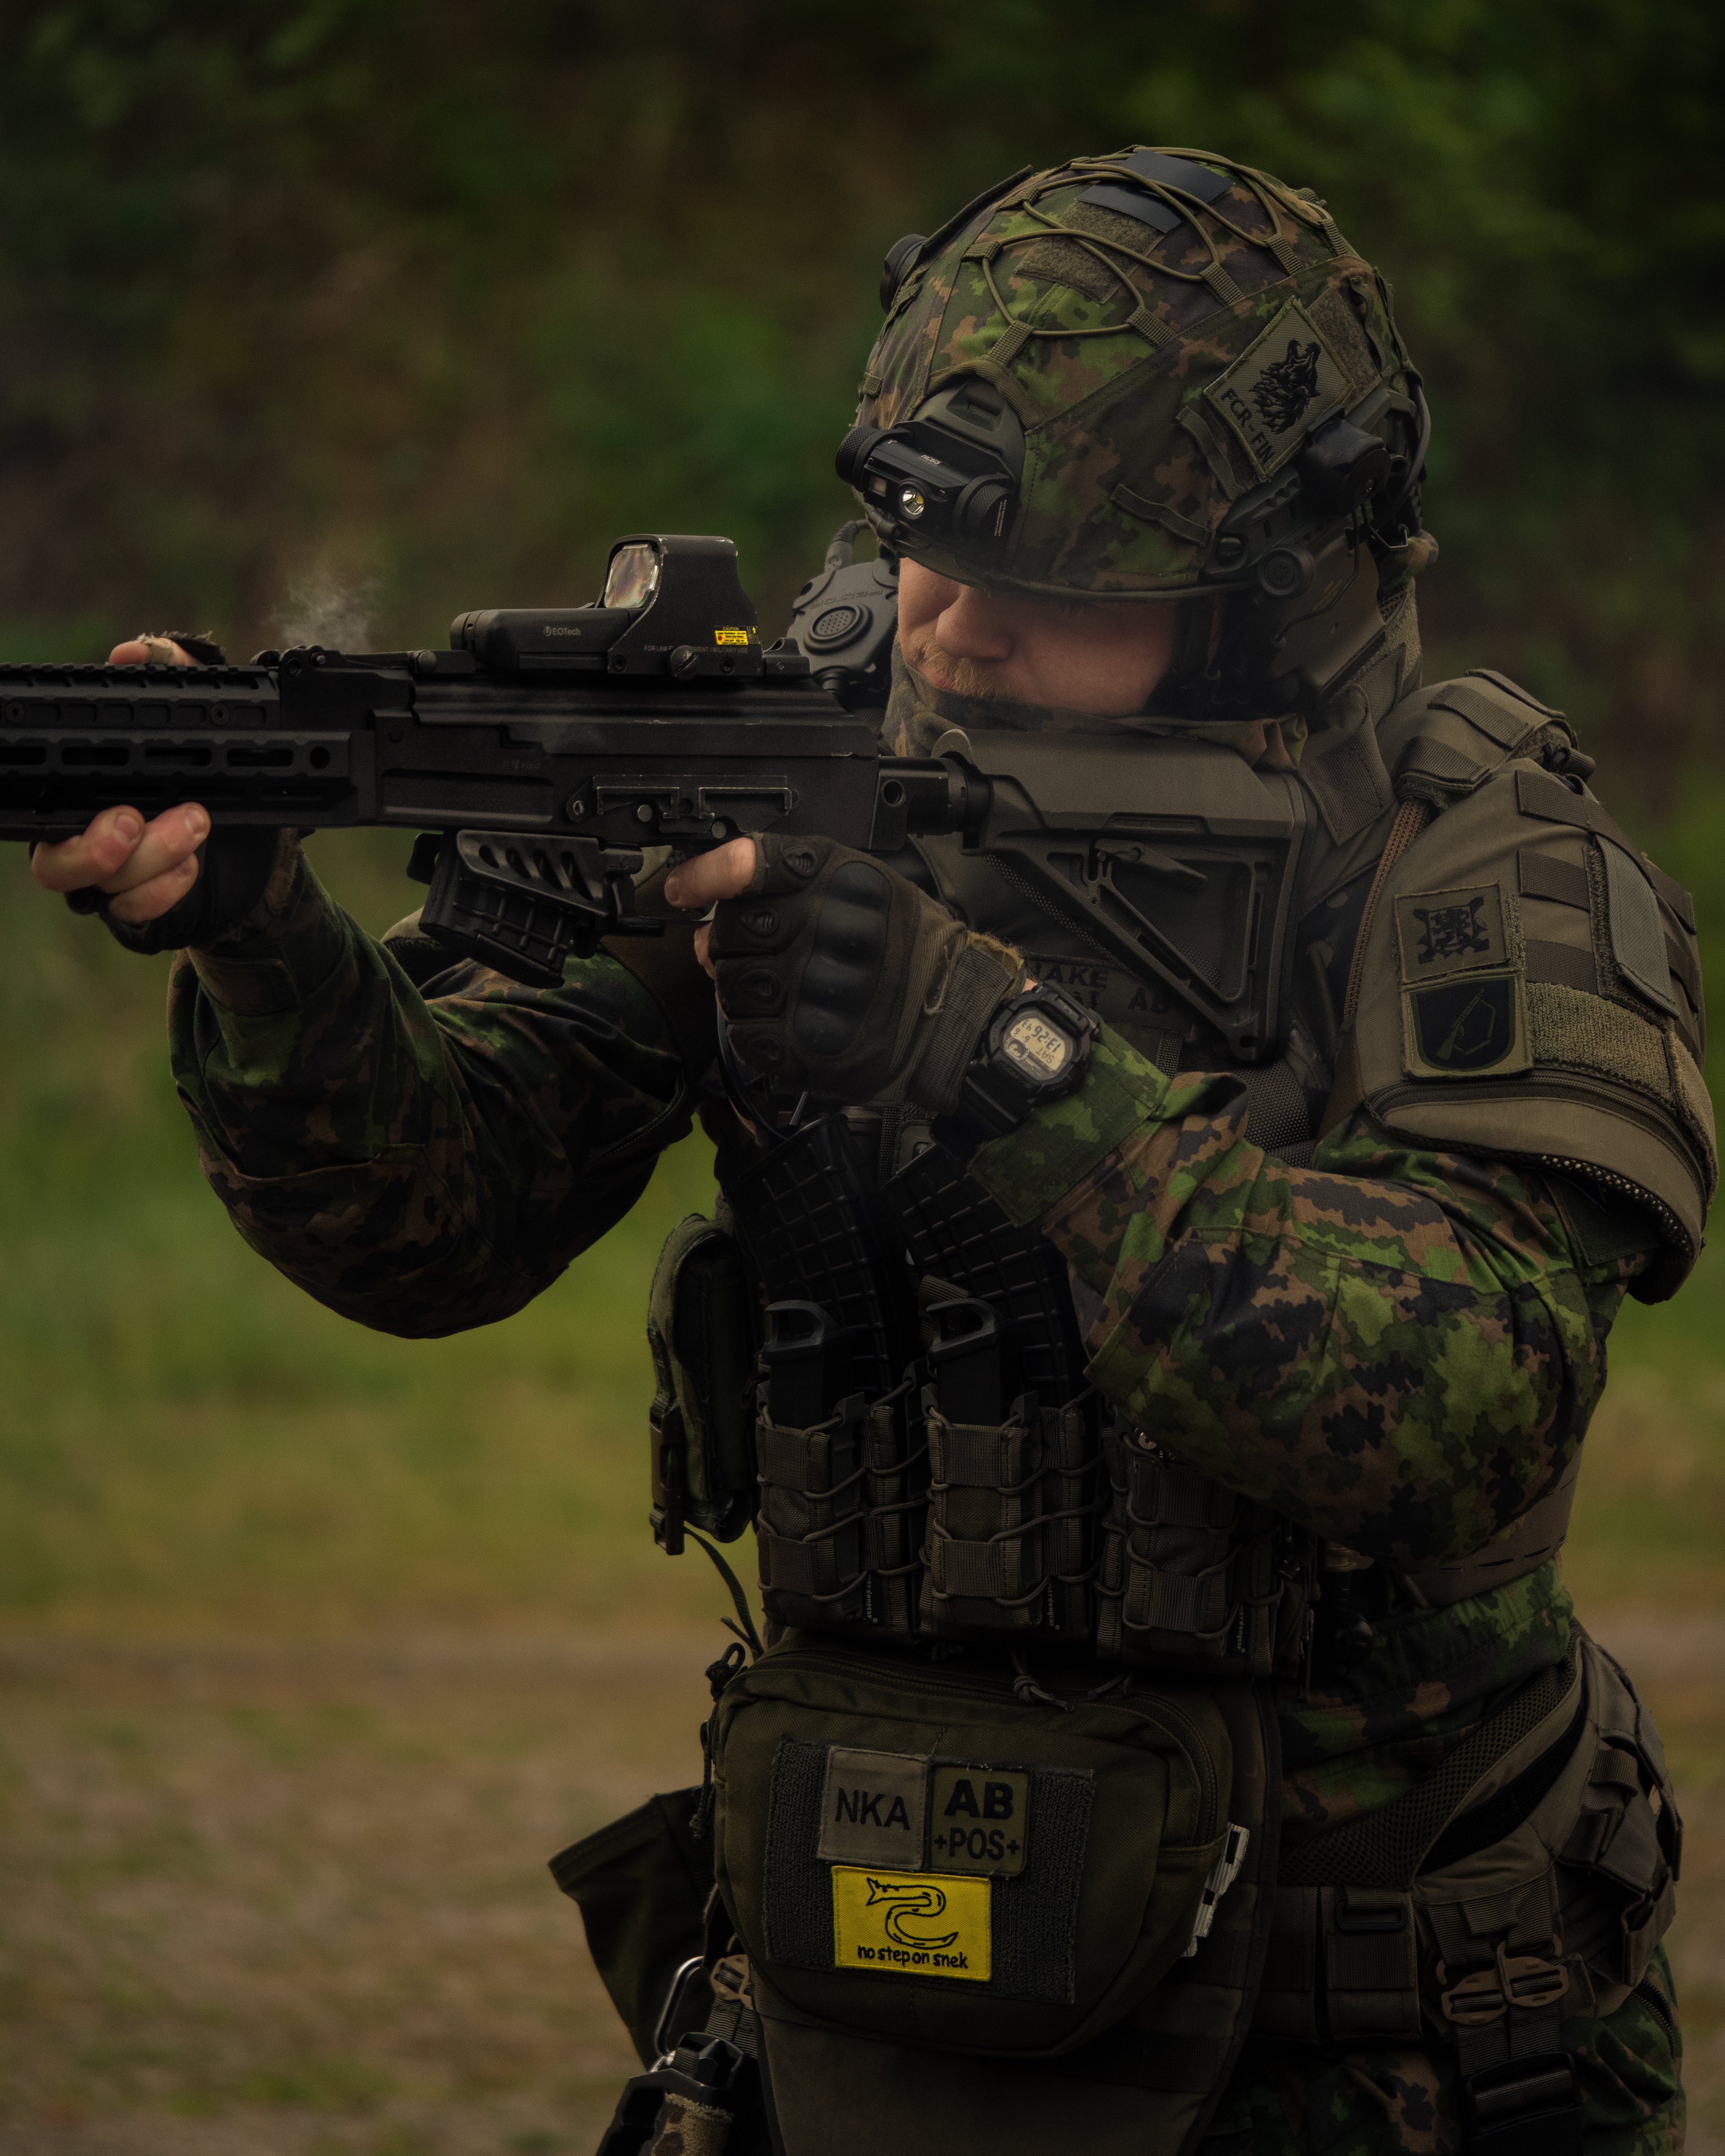 Man with a rifle ak-47 in hand on a gun range shooting. He is wearing body armor, a ballistic helmet , gloves and earpro. Finnish reservist.